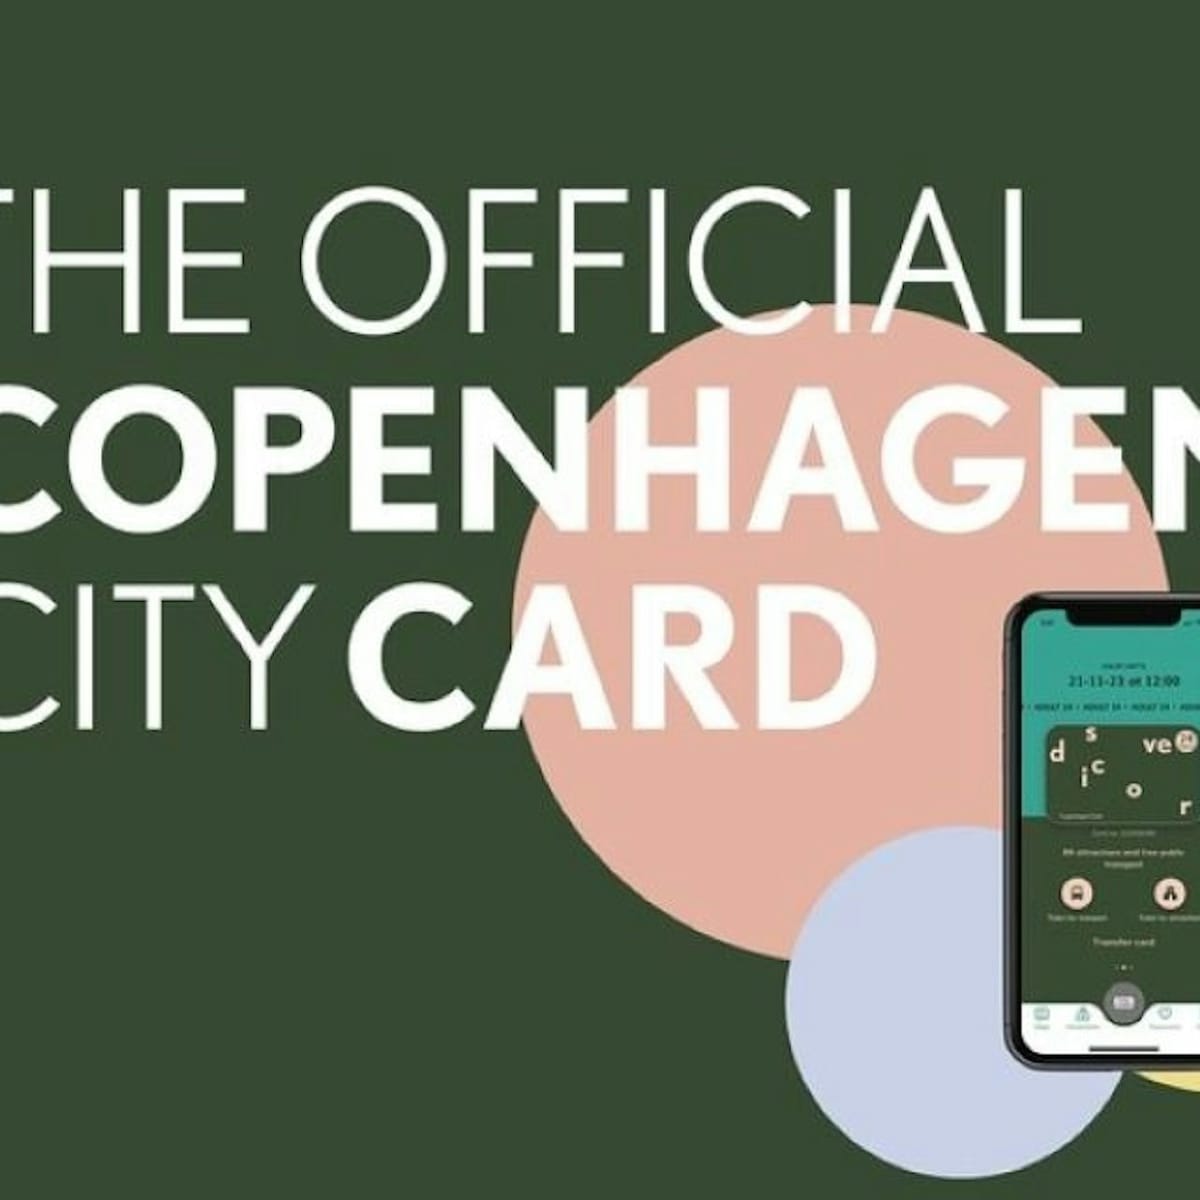 copenhagen-card-discover-entry-to-top-attractions-public-transport_1